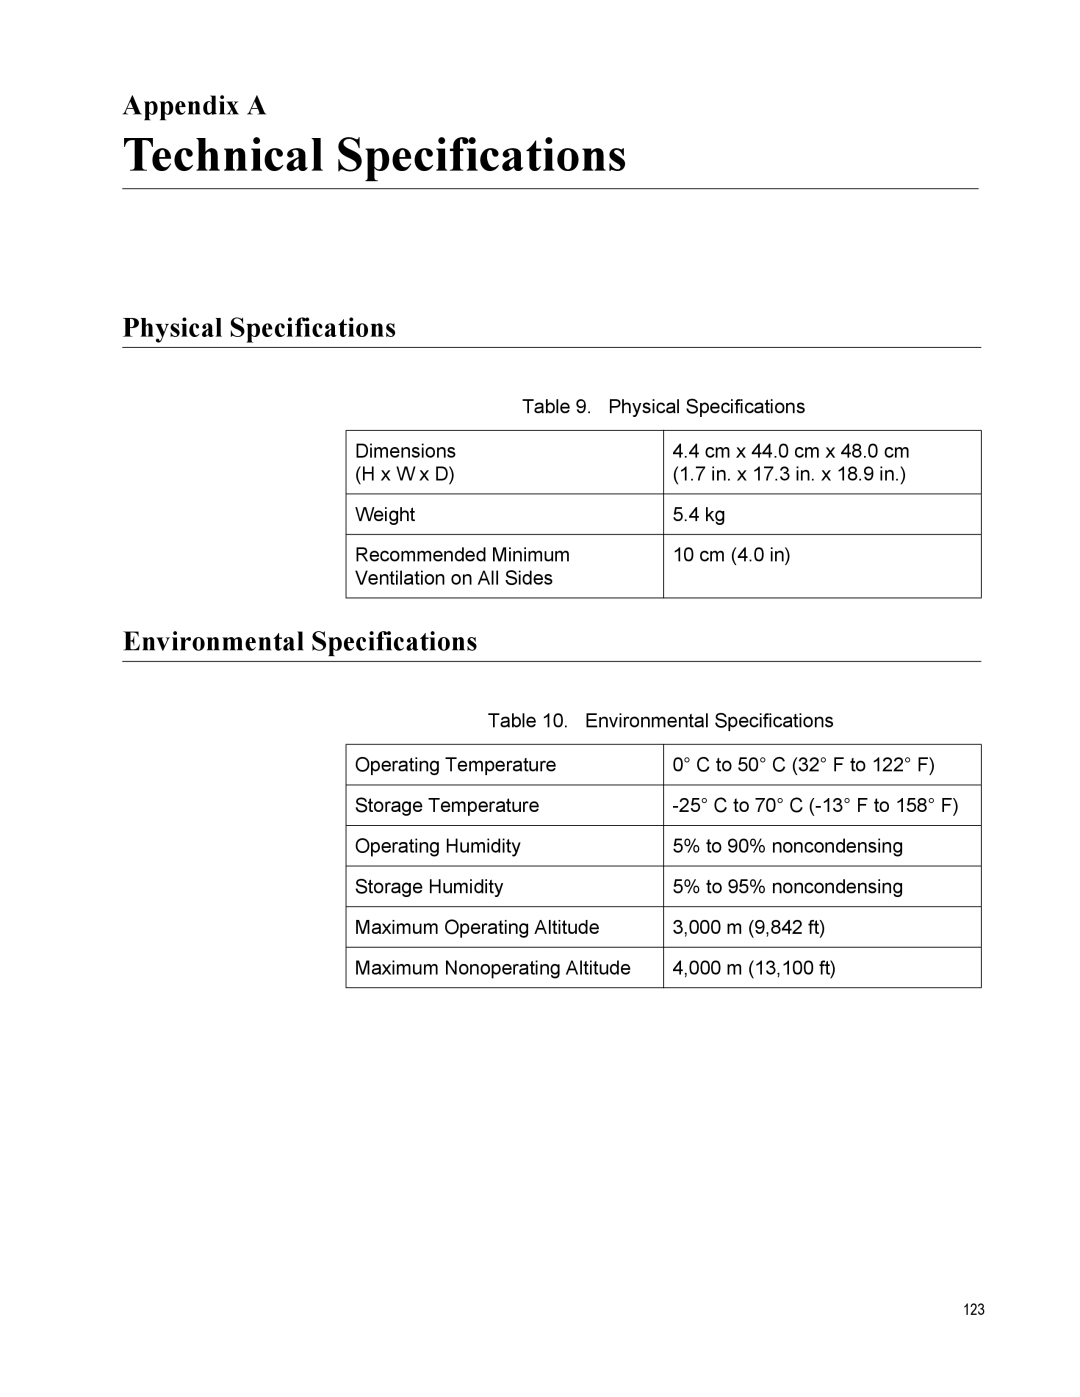 Allied Telesis AT-IX5-28GPX Technical Specifications, Appendix A, Physical Specifications, Environmental Specifications 